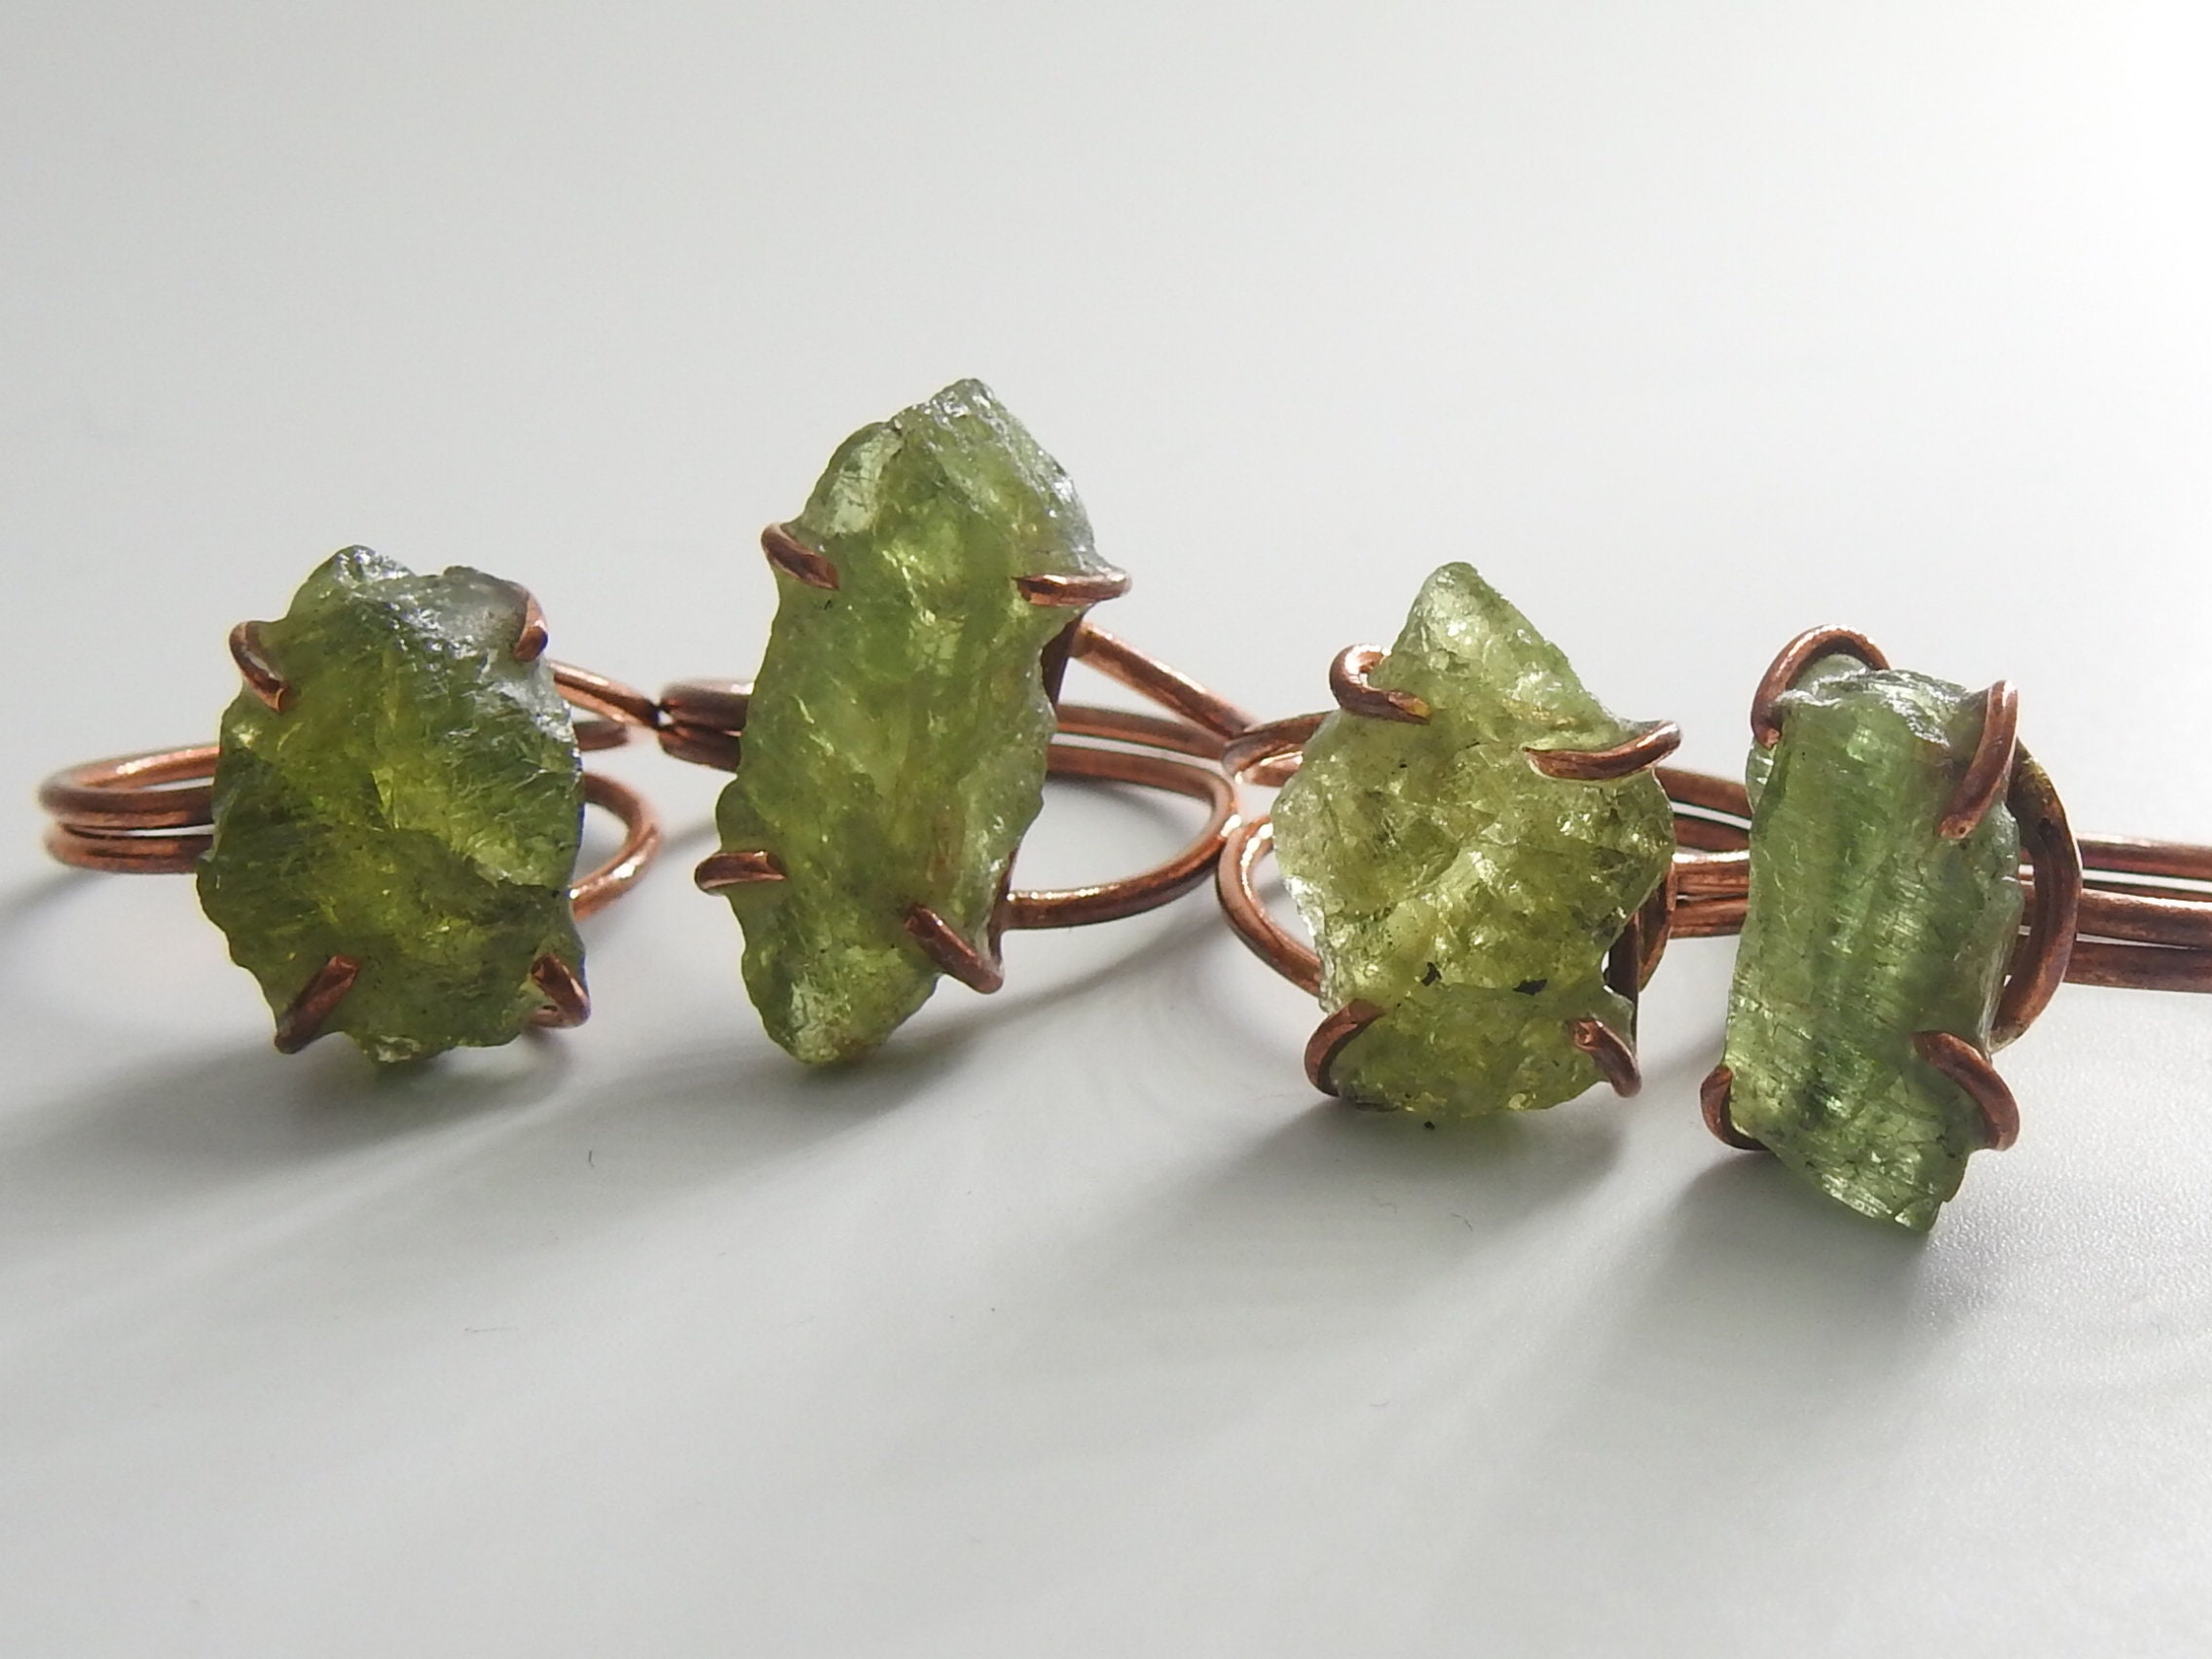 Grossular Garnet Rough Ring,Green,Wire Wrapping,Copper,Adjustable,Wire-Wrapped,Minerals Stone,One Of A Kind 15-20MM Long CJ-1 | Save 33% - Rajasthan Living 14